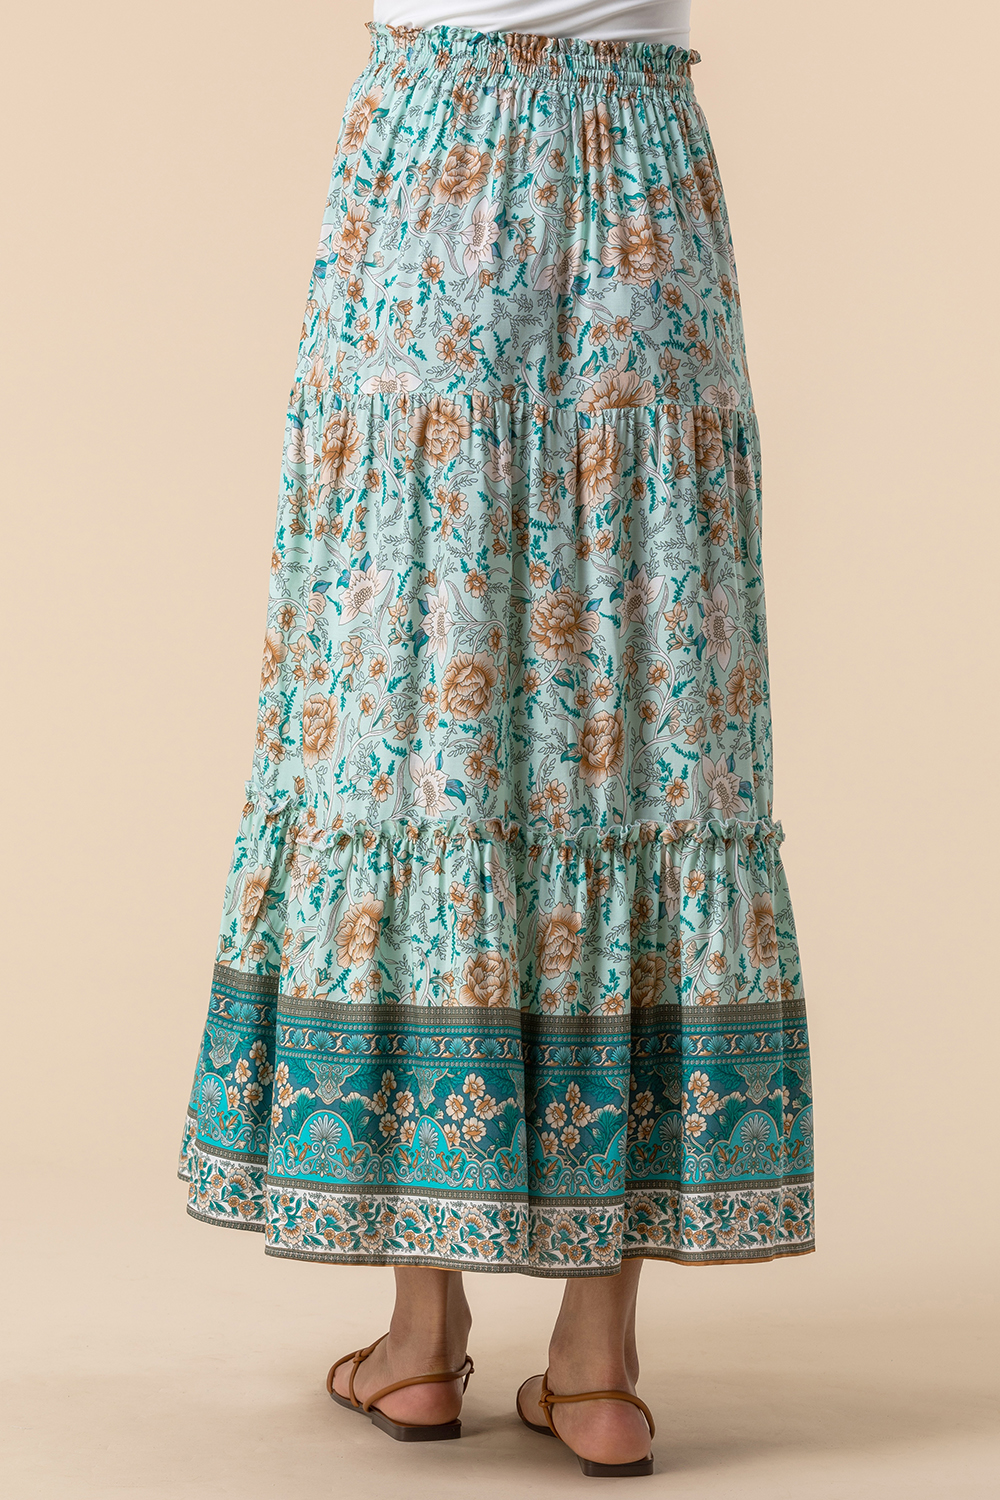 Mint Tiered Floral Print Maxi Skirt, Image 2 of 4